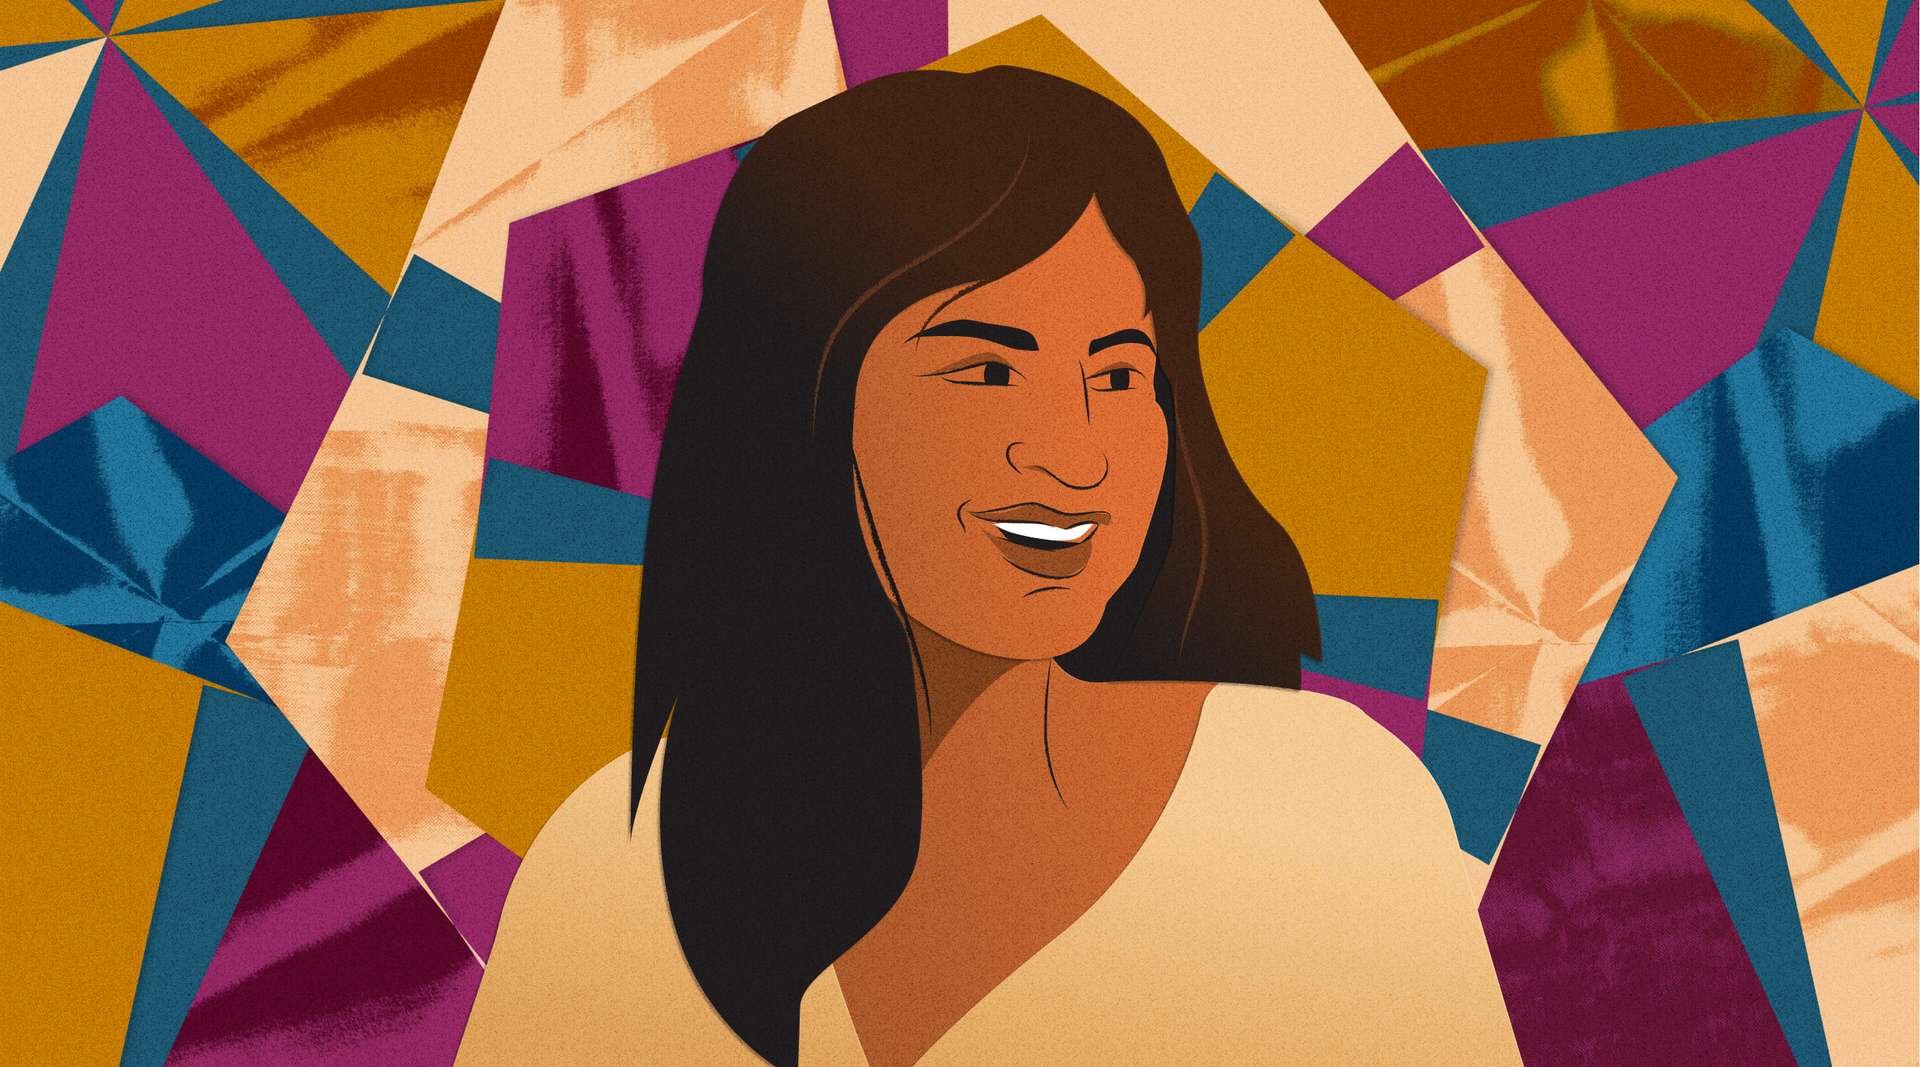 An illustrated headshot of a smiling Sam Kapila against a kaleidoscopic background of maroons, yellows, and blues.